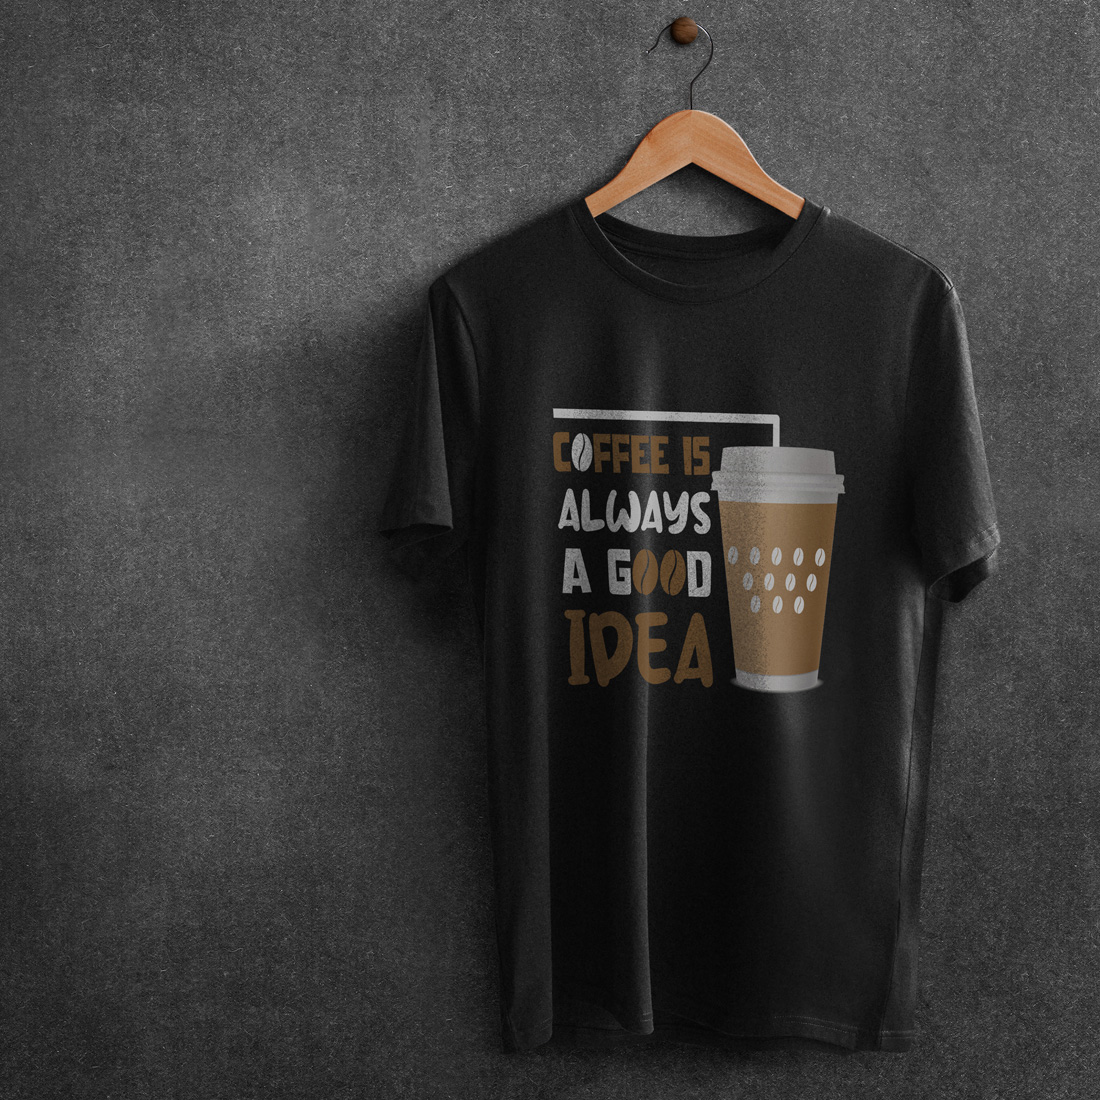 Image of a black t-shirt with a charming coffee-themed print